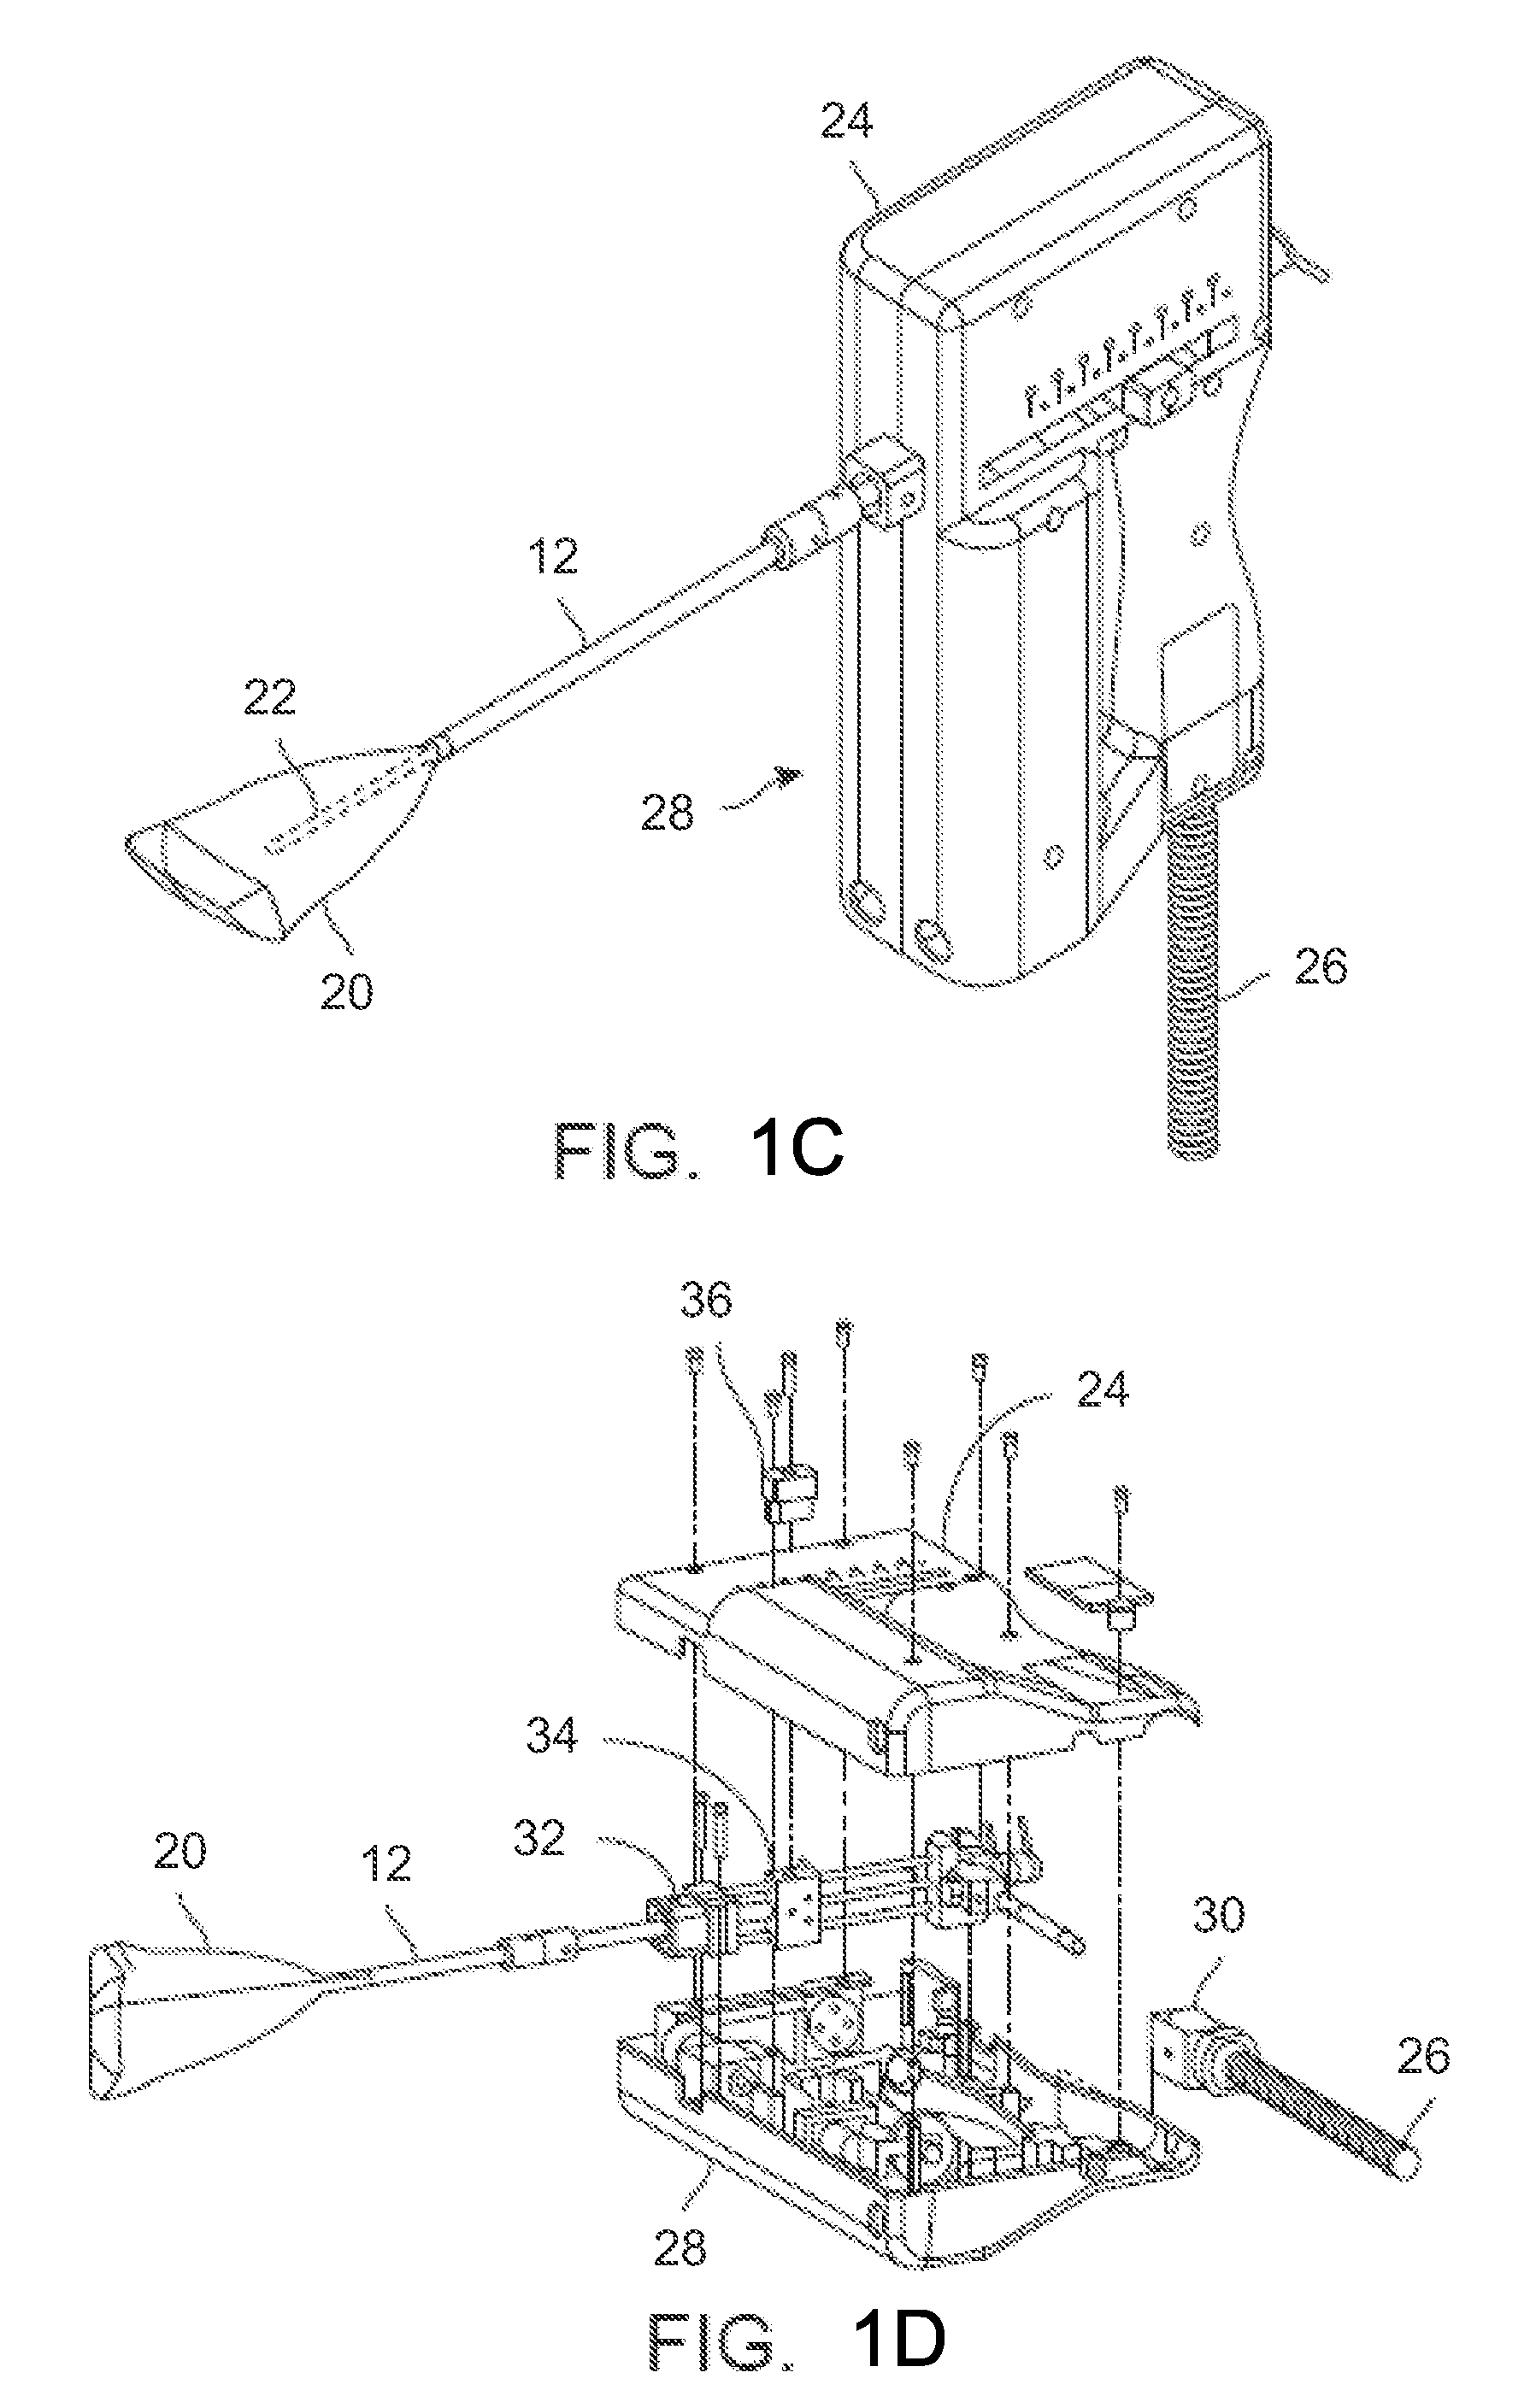 Apparatus and methods for regulating cryogenic treatment